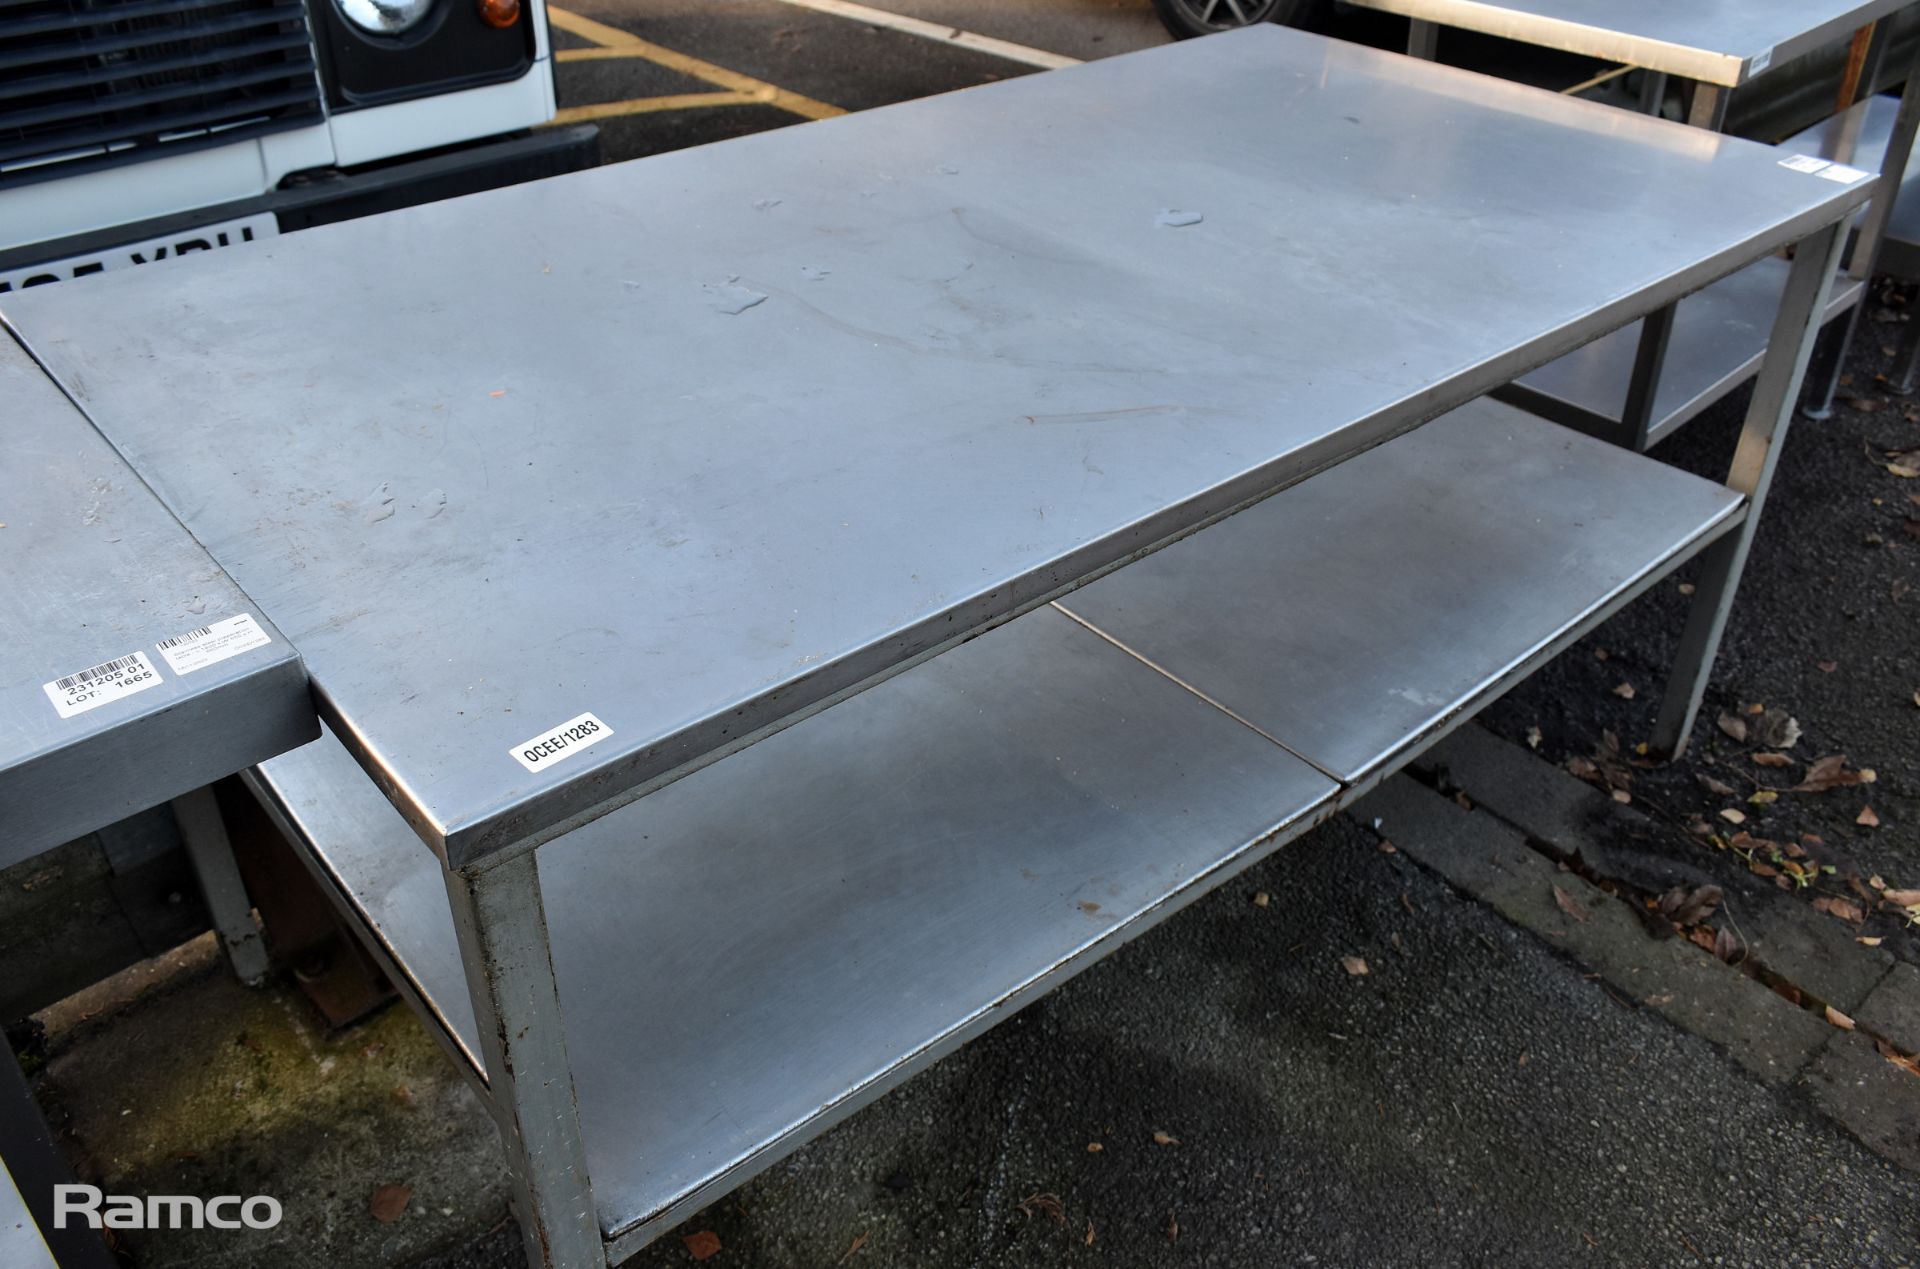 Stainless steel preparation table - L 1680 x W 870 x H 840mm - Image 2 of 3